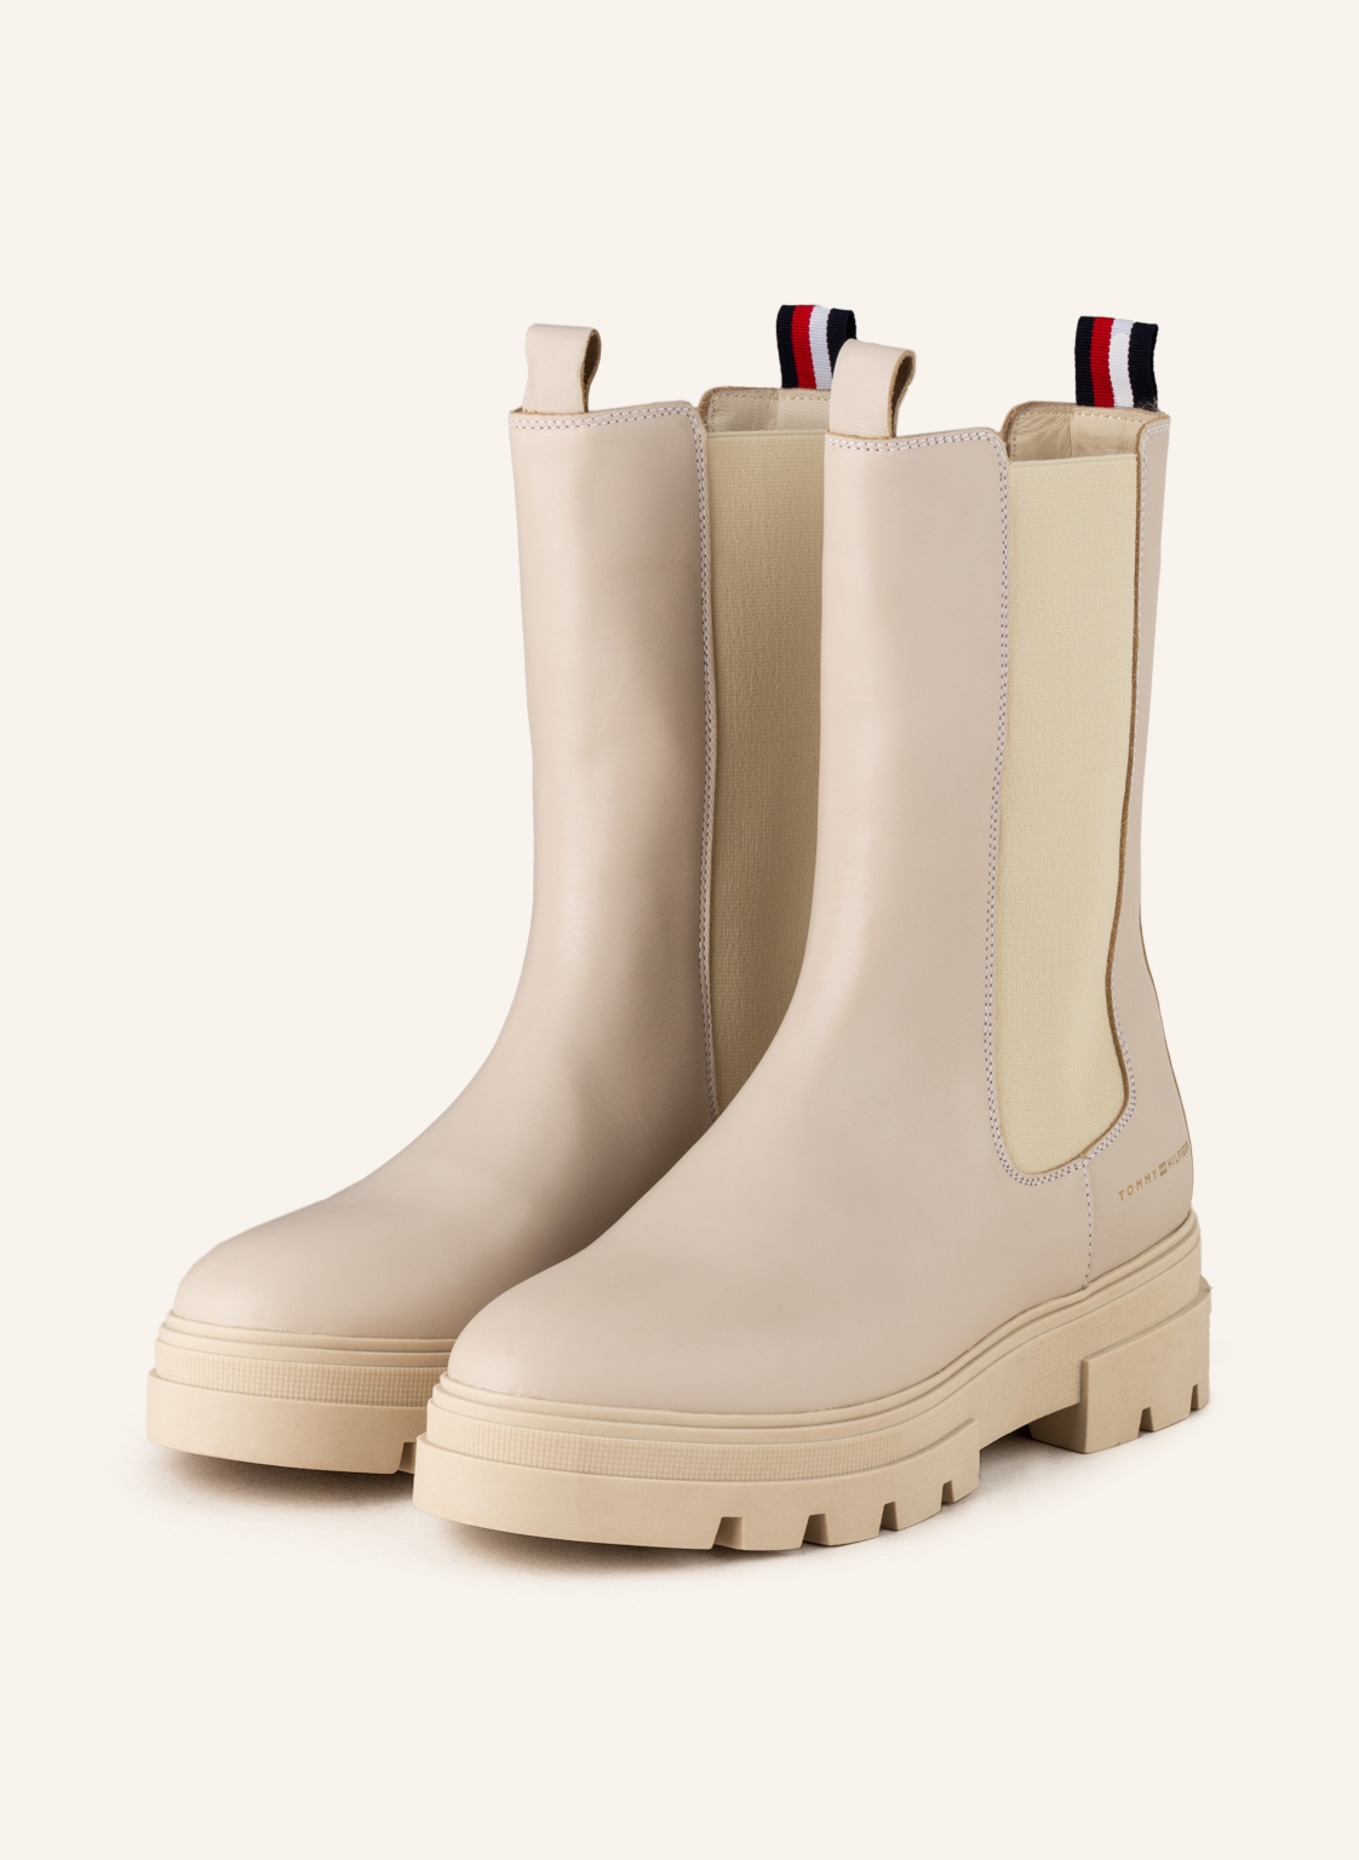 TOMMY HILFIGER Chelsea-Boots, Farbe: CREME (Bild 1)